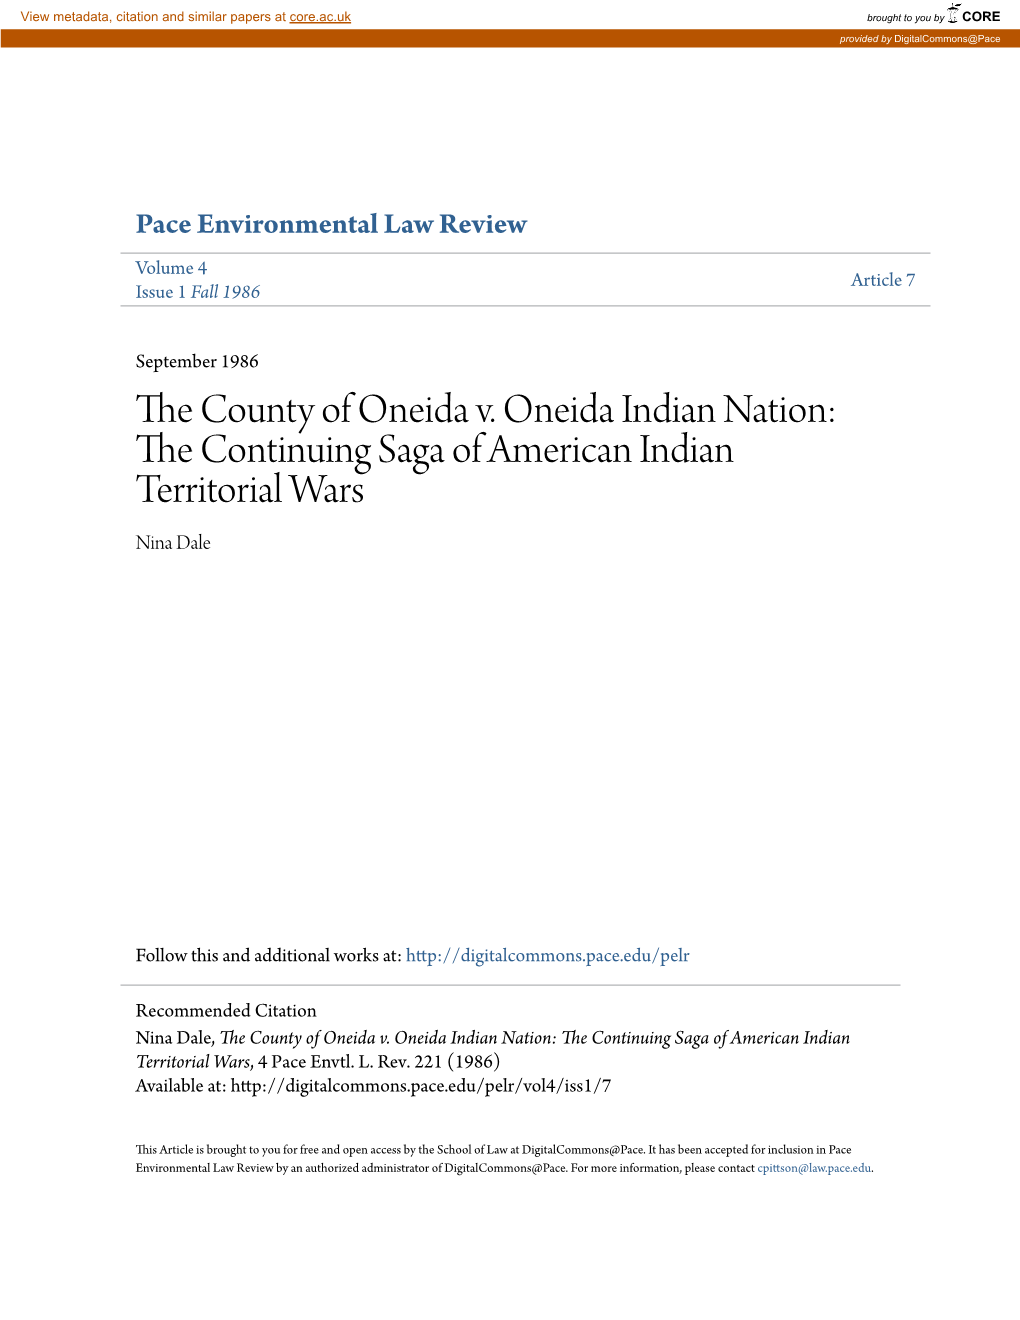 The County of Oneida V. Oneida Indian Nation: the Continuing Saga of American Indian Territorial Wars, 4 Pace Envtl